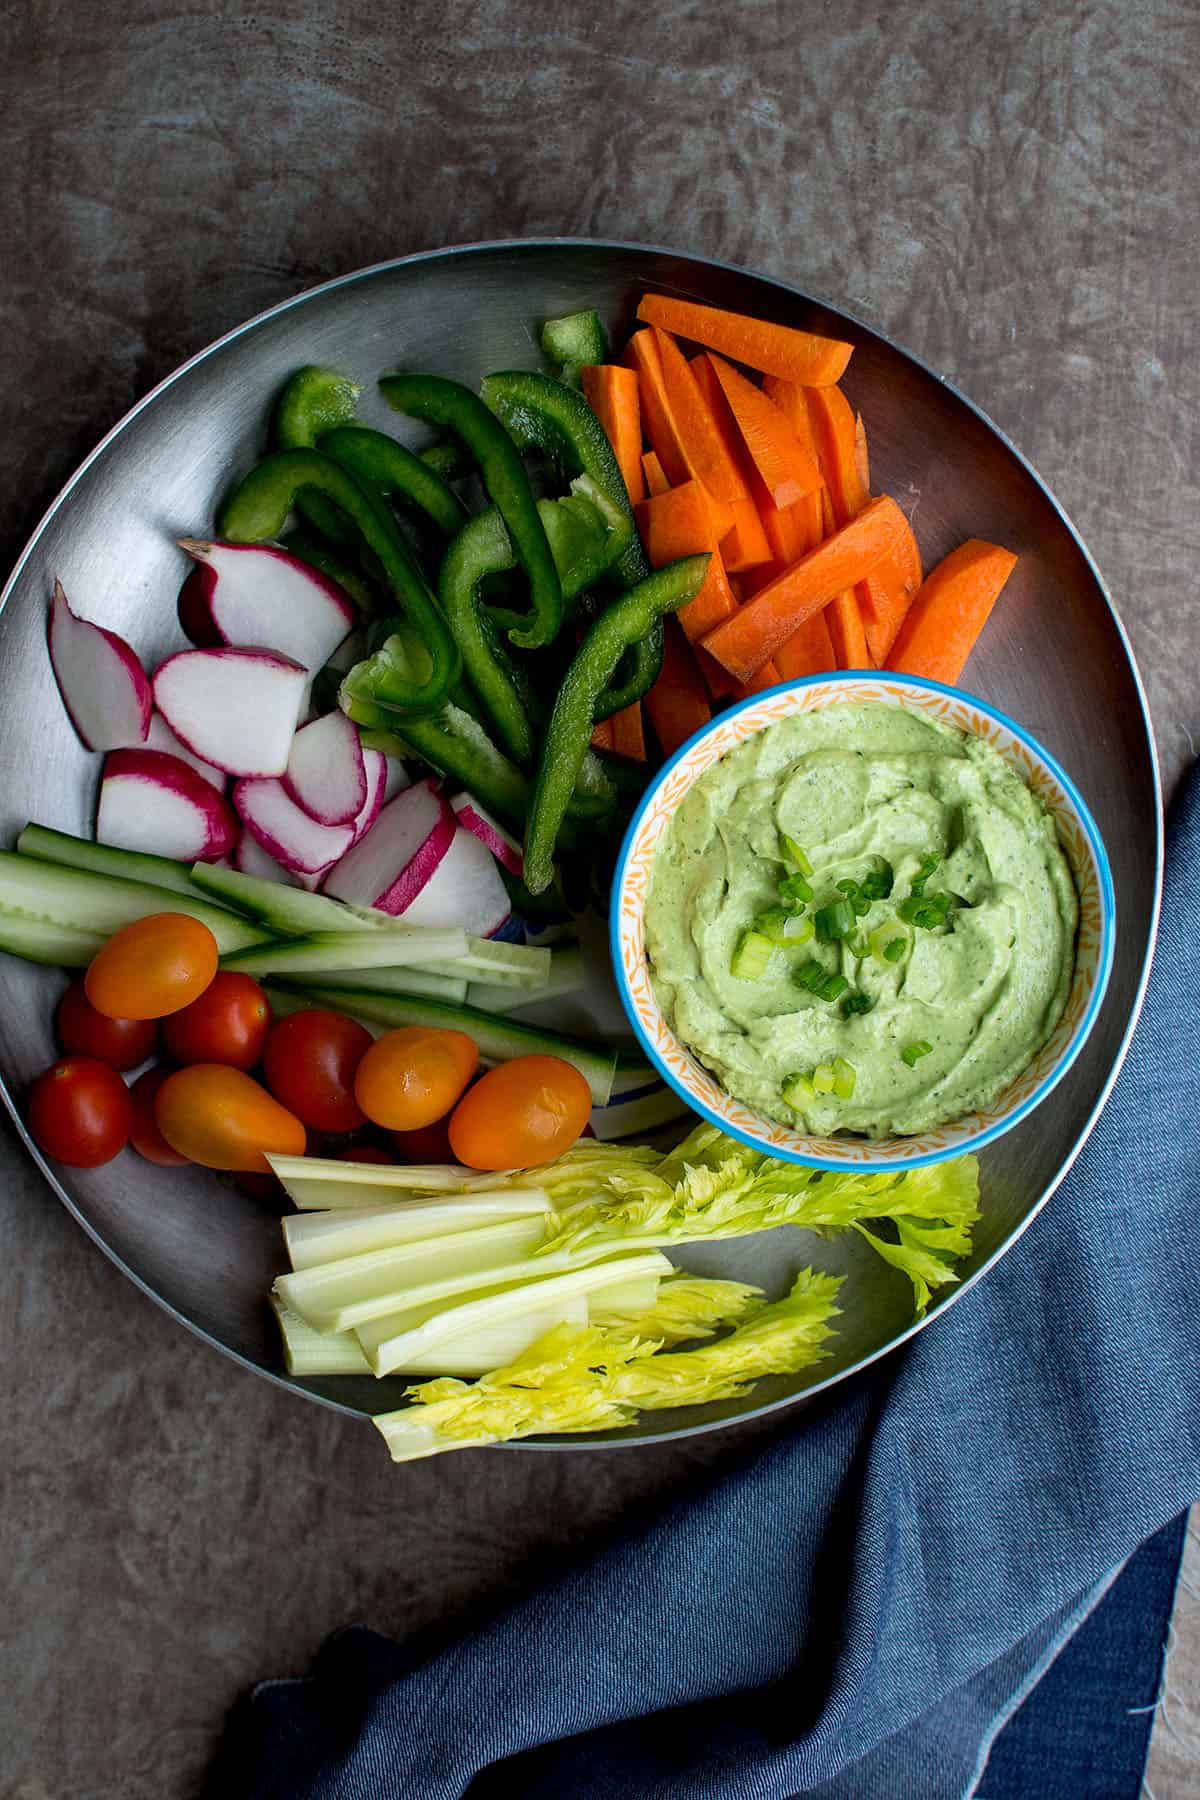 Pewter tray with a bowl of green goddess dip and chopped veggies.